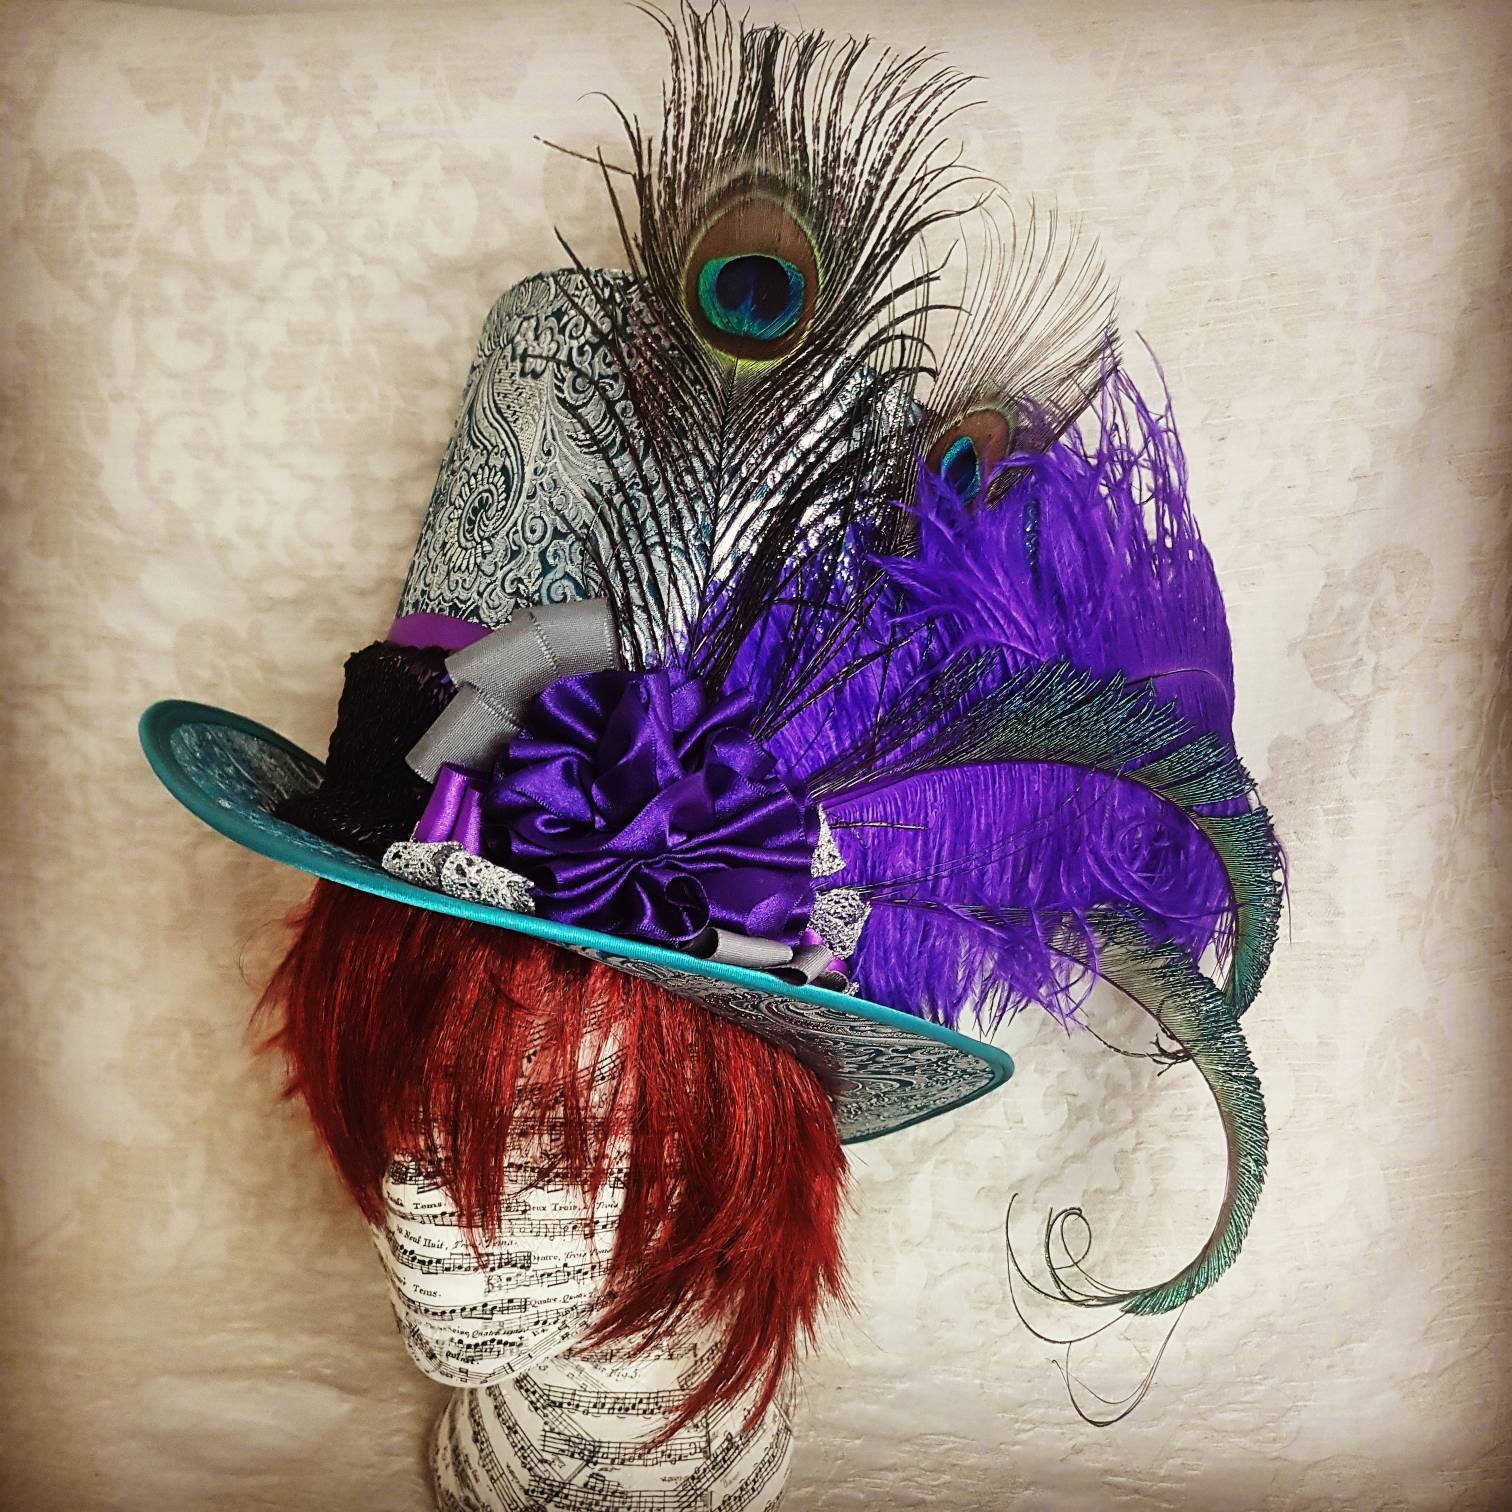 Turquoise Cluster Hat Jazz Feathers